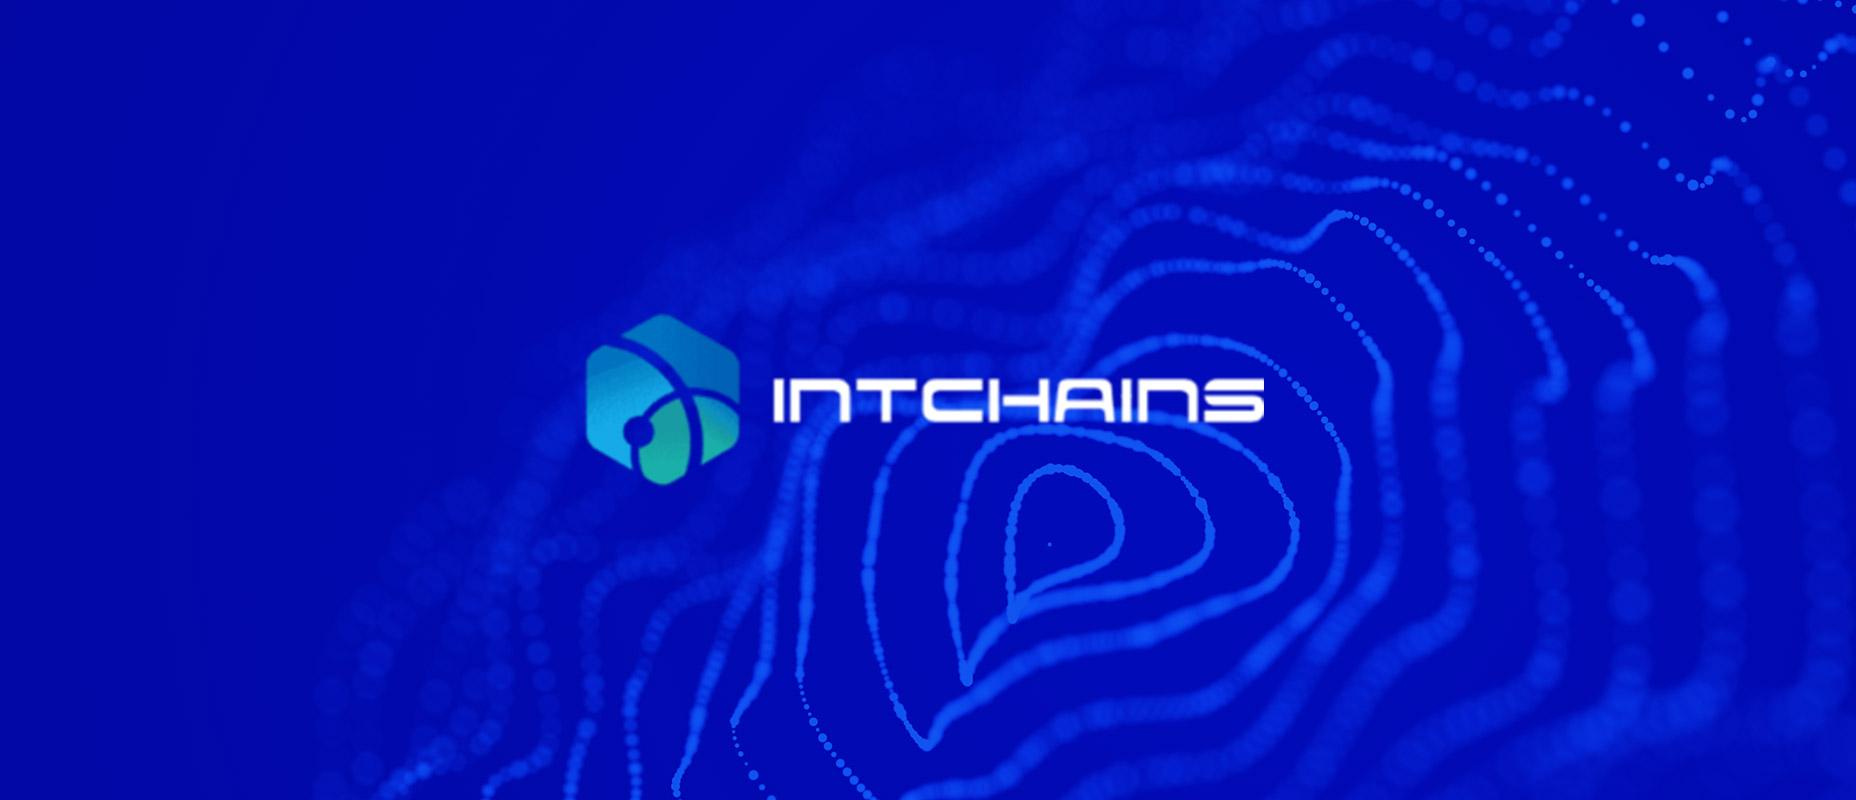 Brief information on Intchains Group